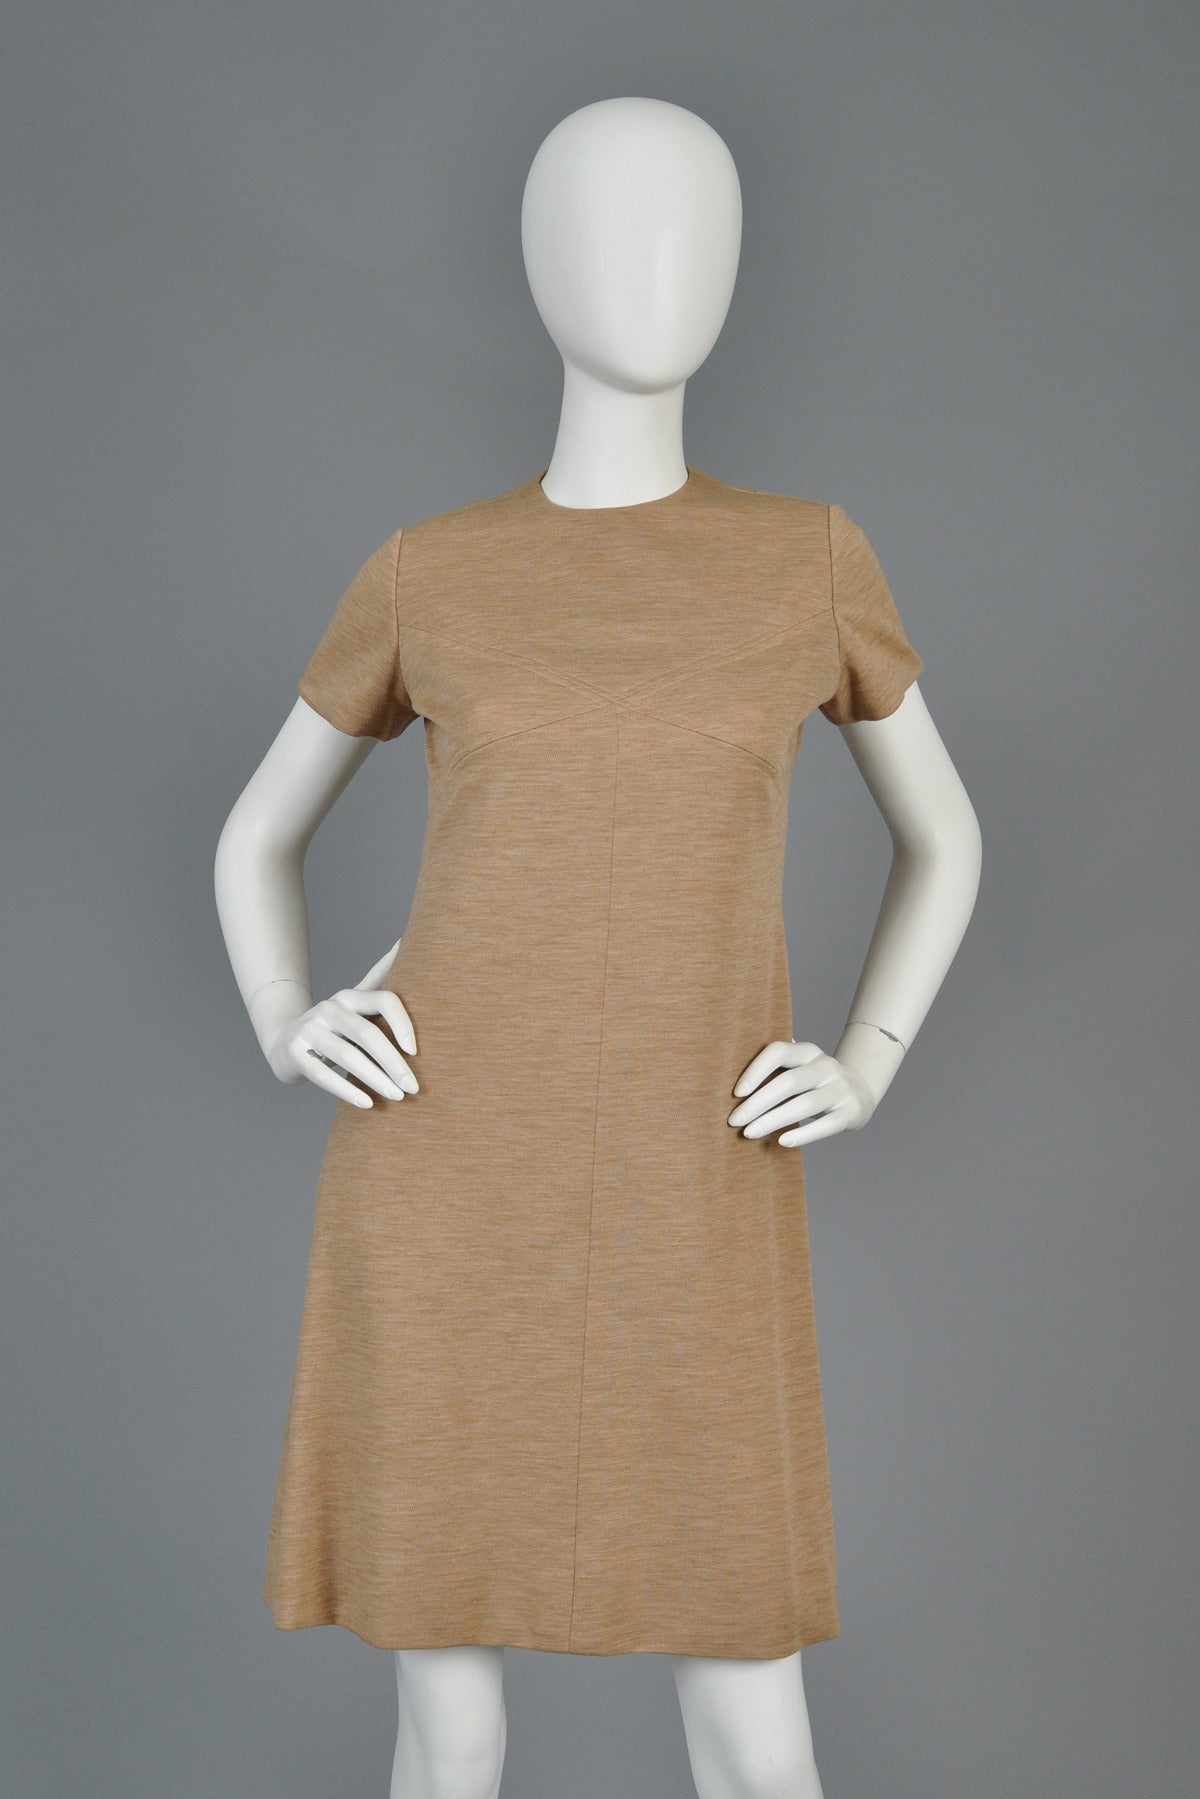 Super adorable 1960s space age inspired wool mini dress by Bill Blass. Such a great little piece! Classic a-line construction with ultra high neckline, capped sleeves and inserted diamond details around the bust. Lovely mocha colored melange wool.